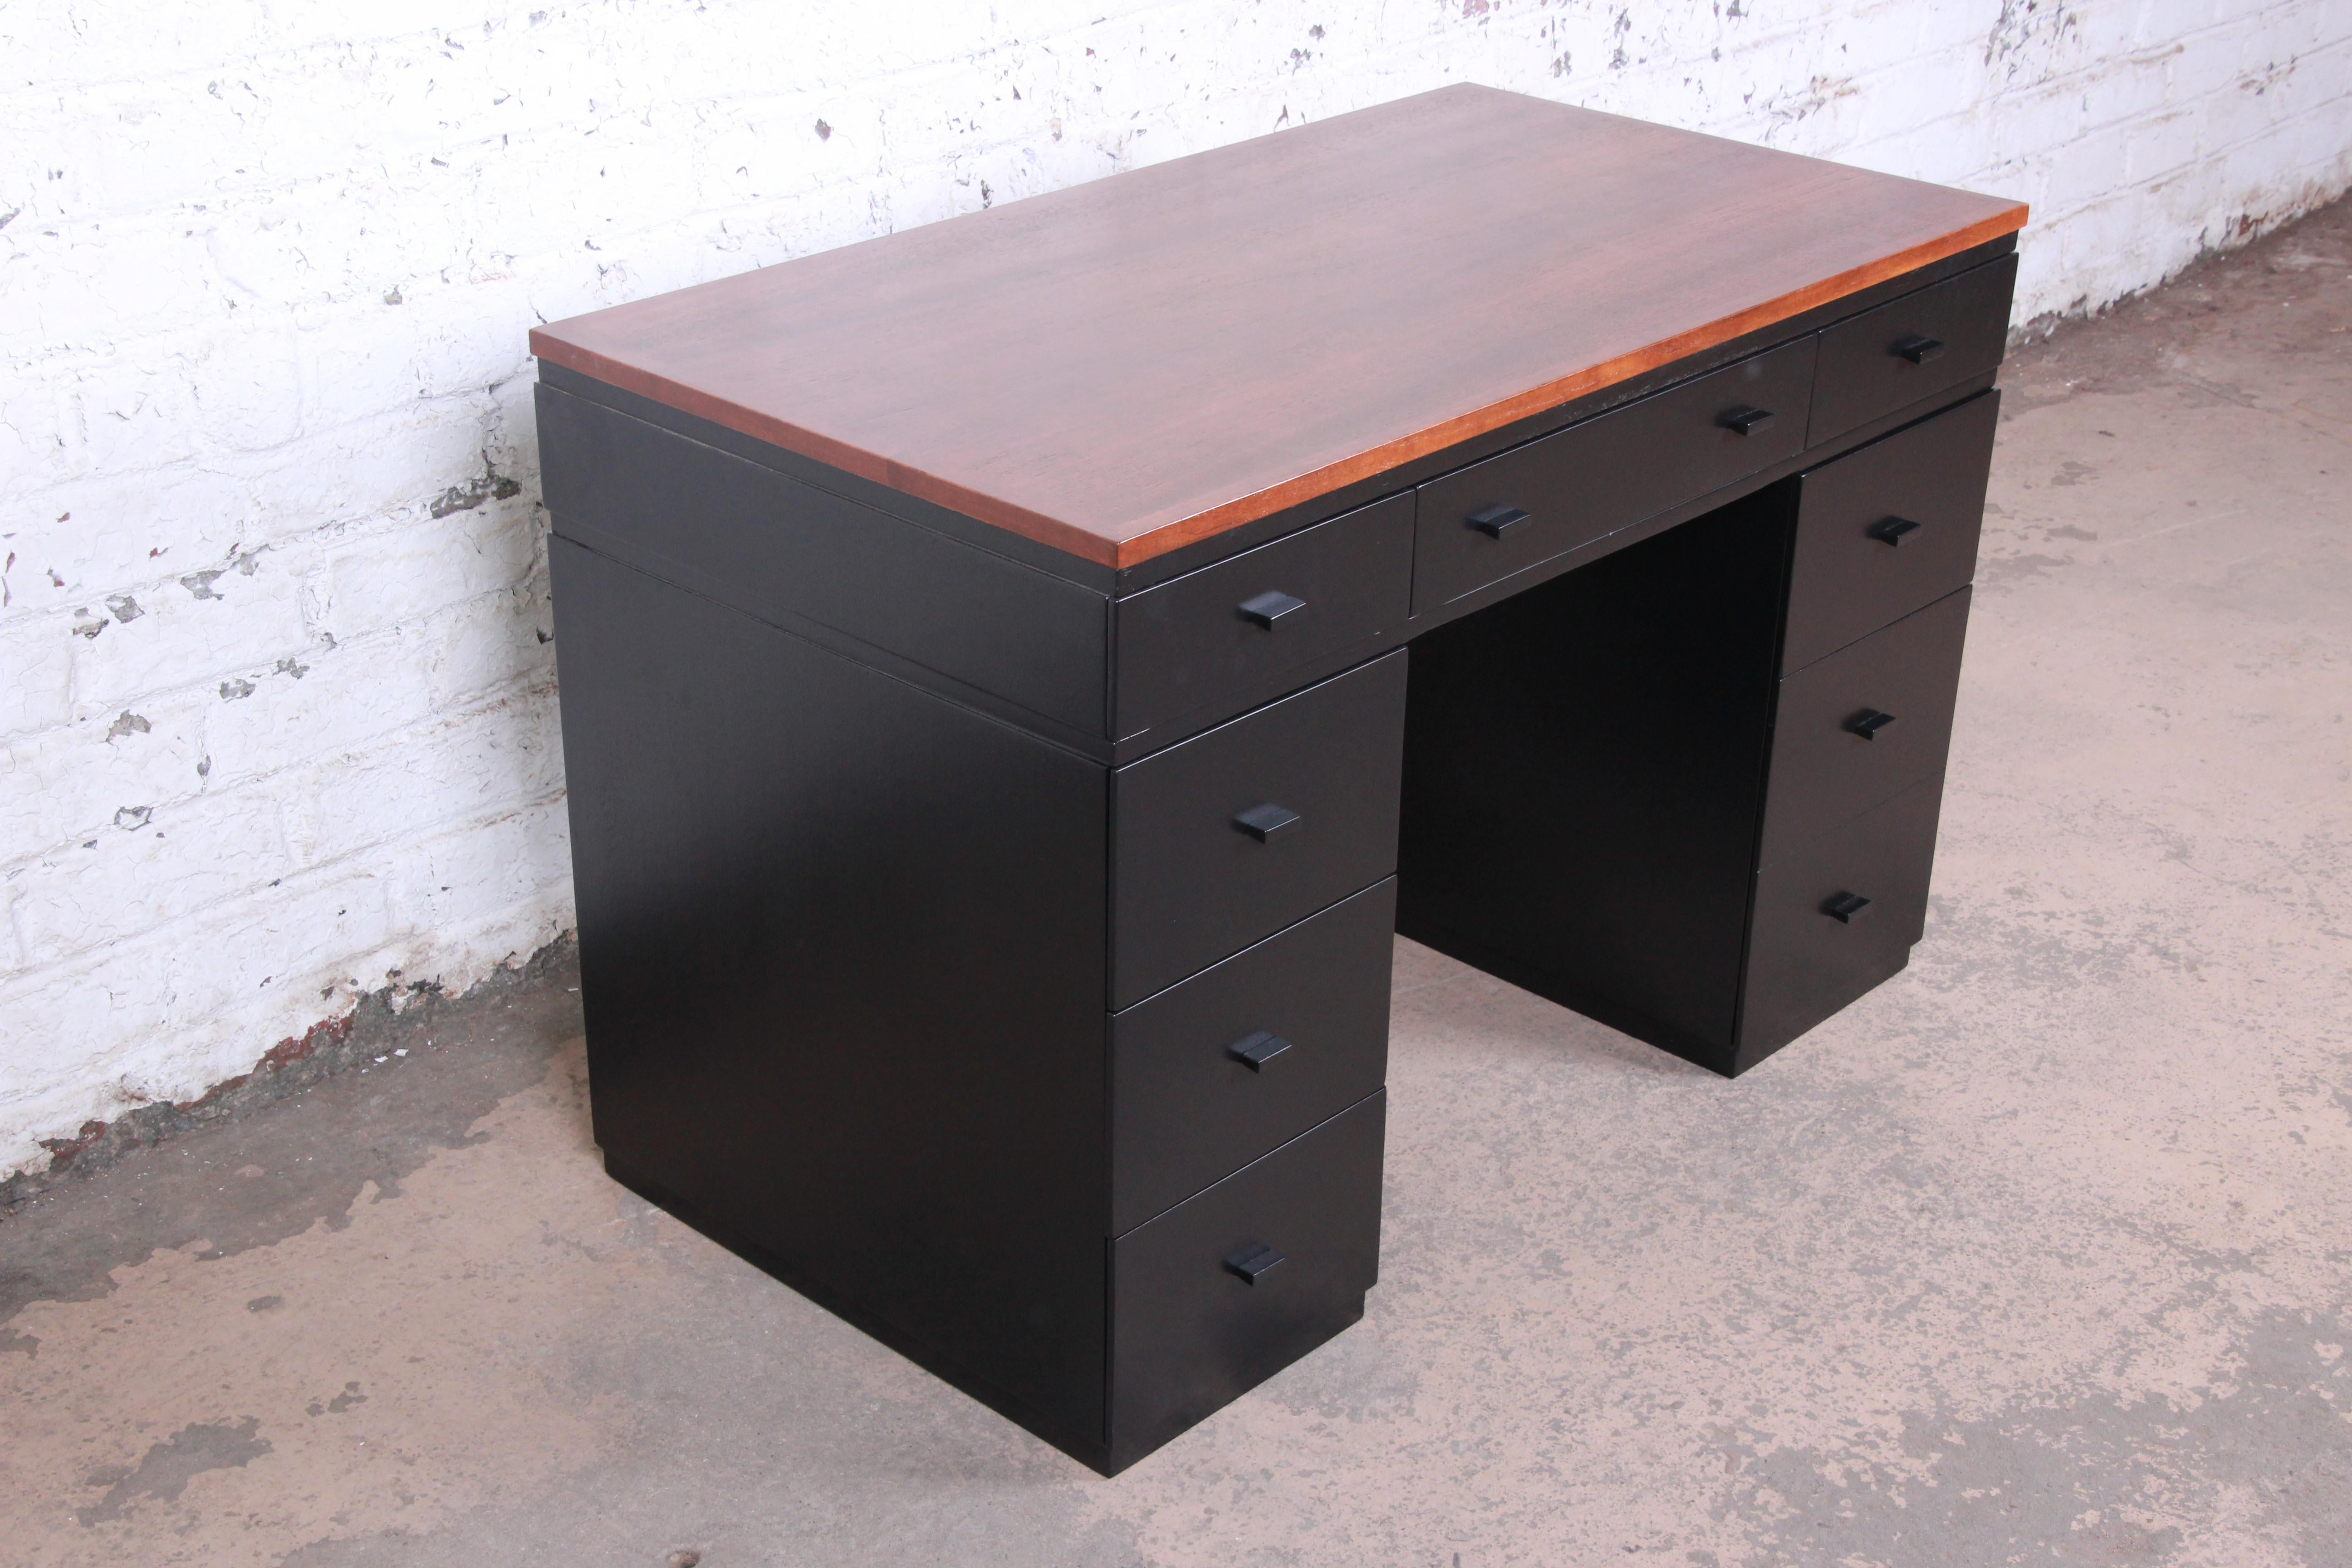 American Early Edward Wormley for Dunbar Walnut and Black Lacquered Kneehole Desk, 1940s